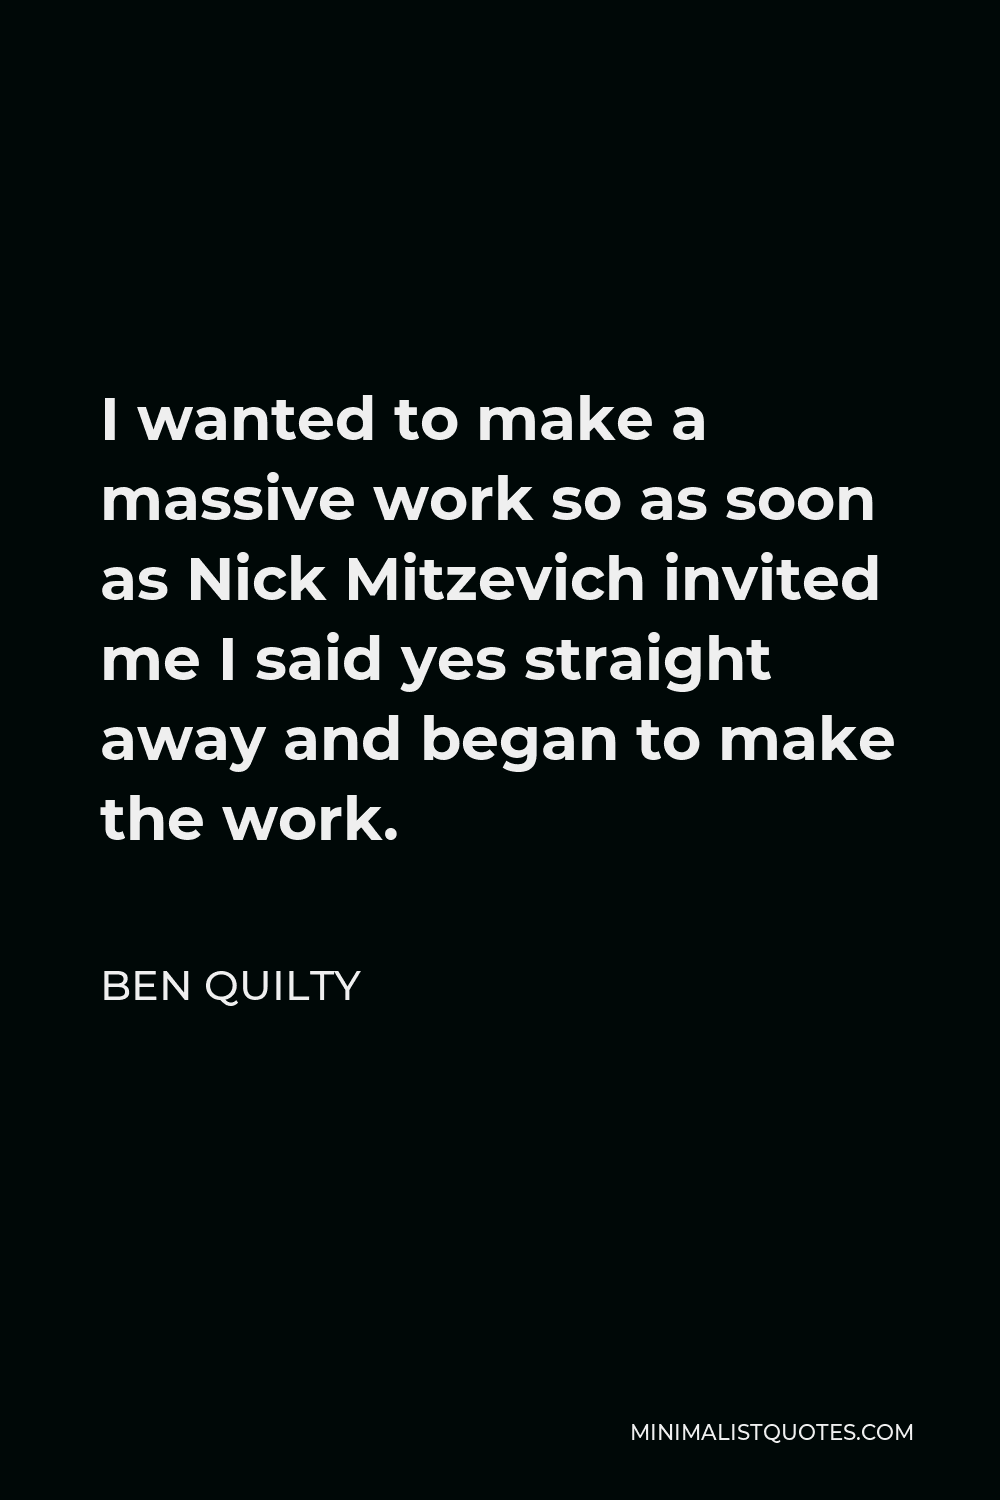 Ben Quilty Quote - I wanted to make a massive work so as soon as Nick Mitzevich invited me I said yes straight away and began to make the work.